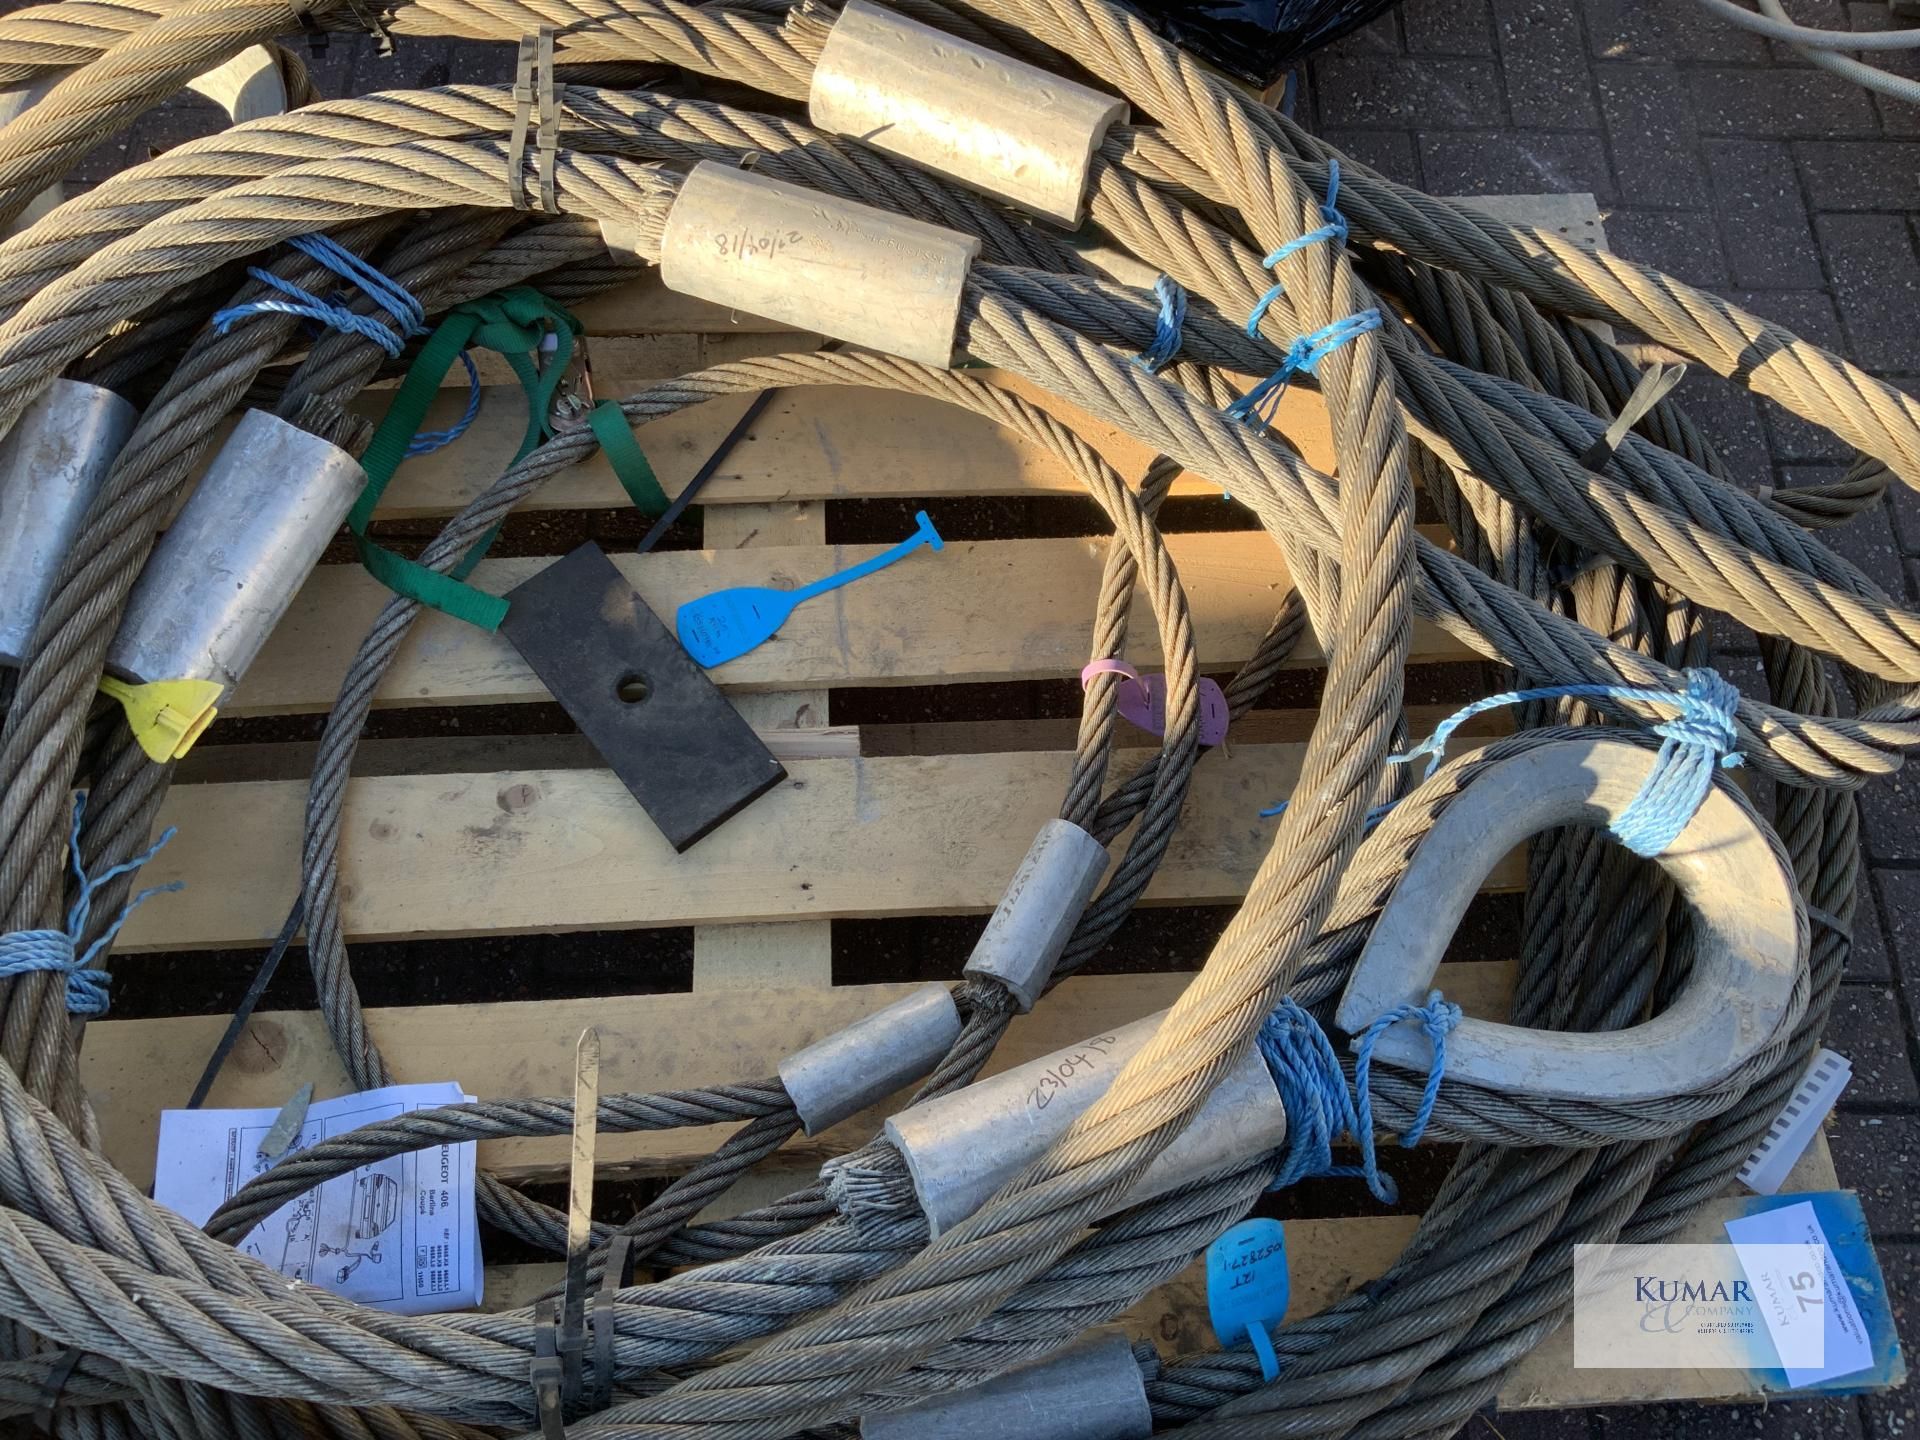 Pallet of Braided Steel Wire Lifting Cables - Mixed SWL Ratings - Image 7 of 14